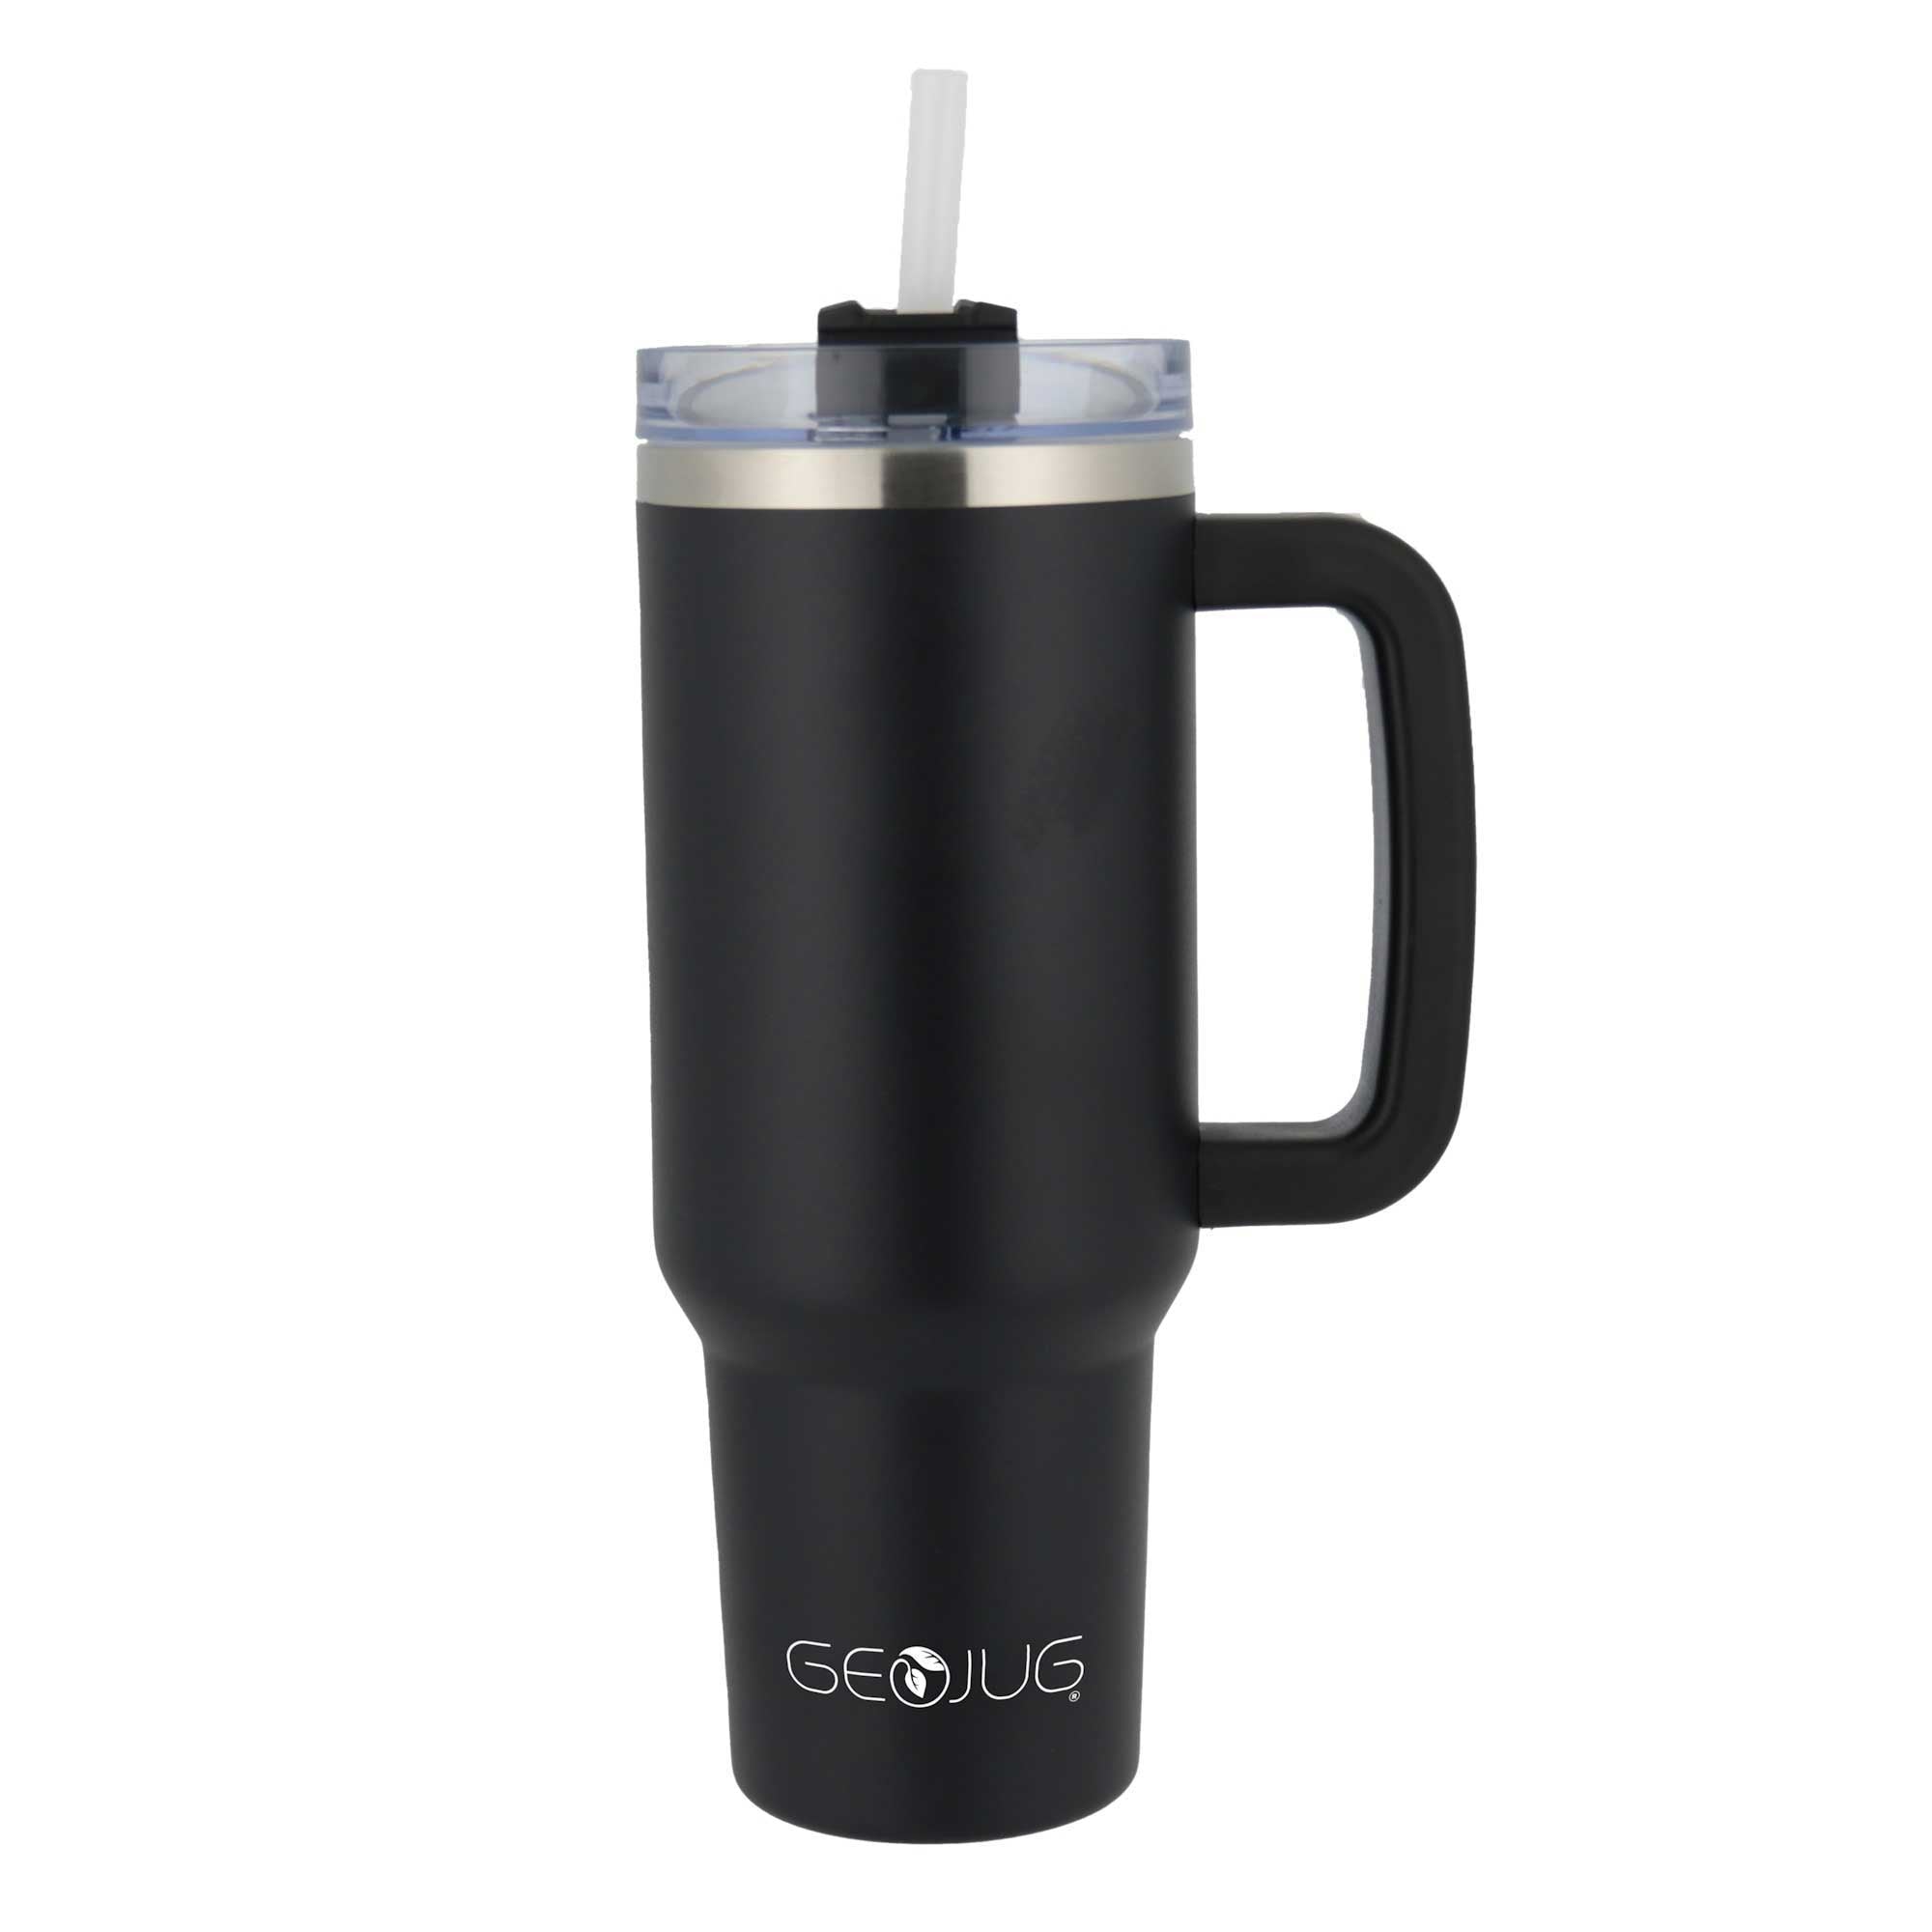 Brentwood GEOJUG CMB-1200BK 40oz Insulated Stainless Steel Tumbler Cup with Handle, Lid, and Straw, Black